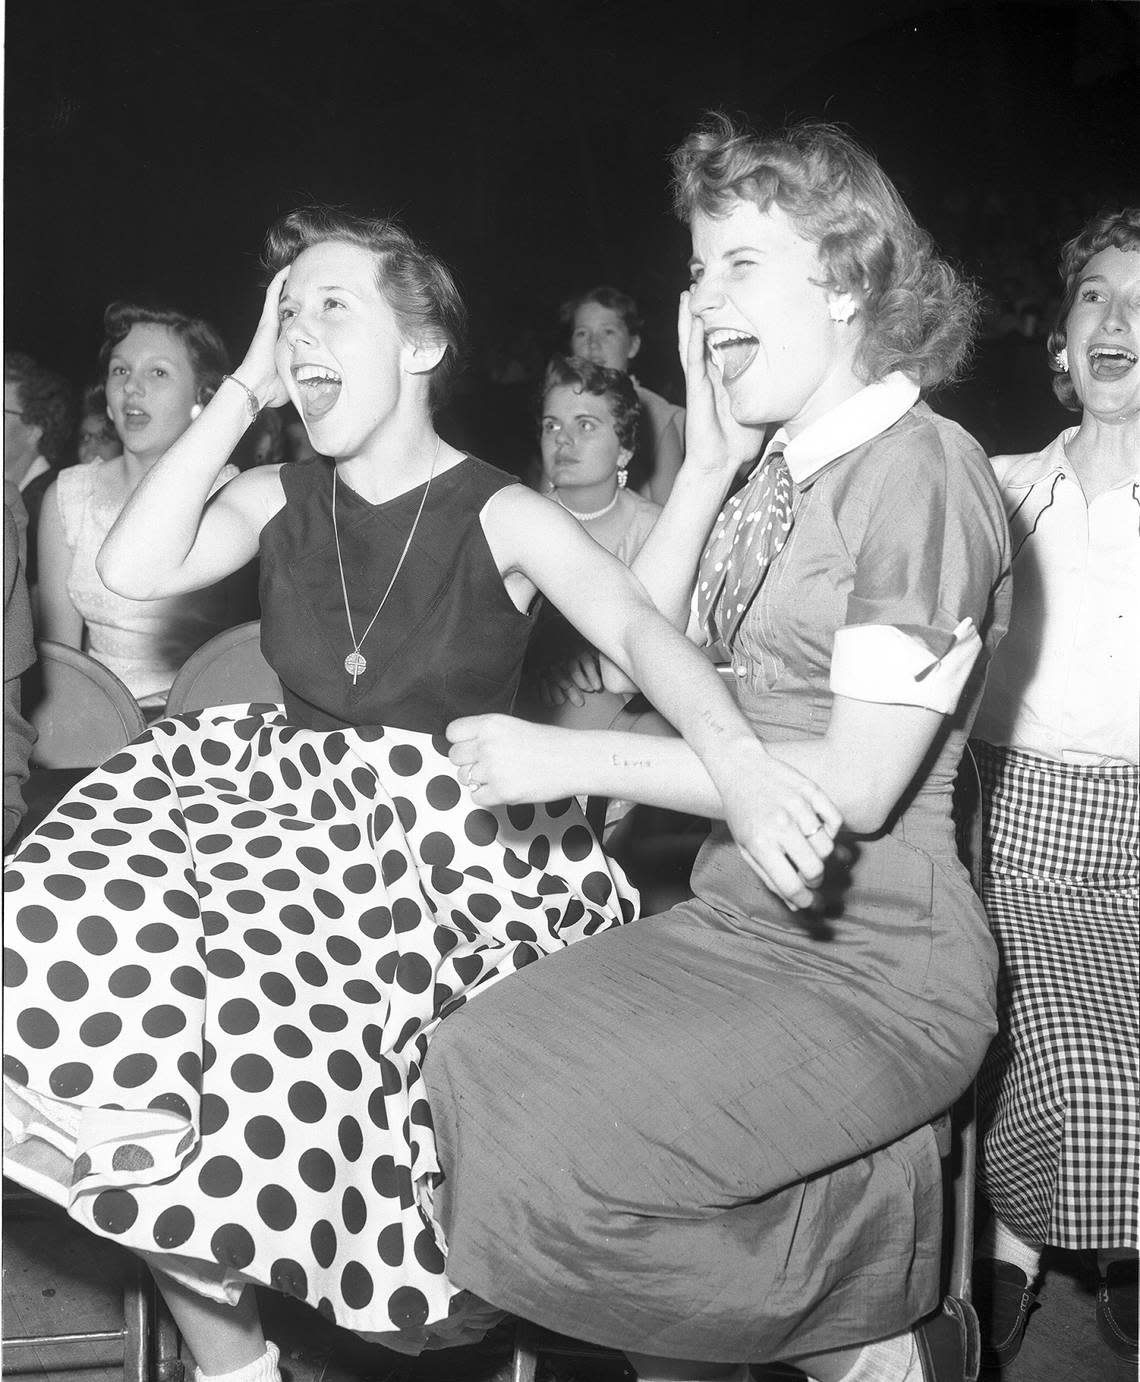 April 20, 1956: Georgiana Blaylock, left, and Dolores Orms, both 16 from Dalla, with “Elvis” carved into their arms at his show in the Fort Worth Northside Coliseum